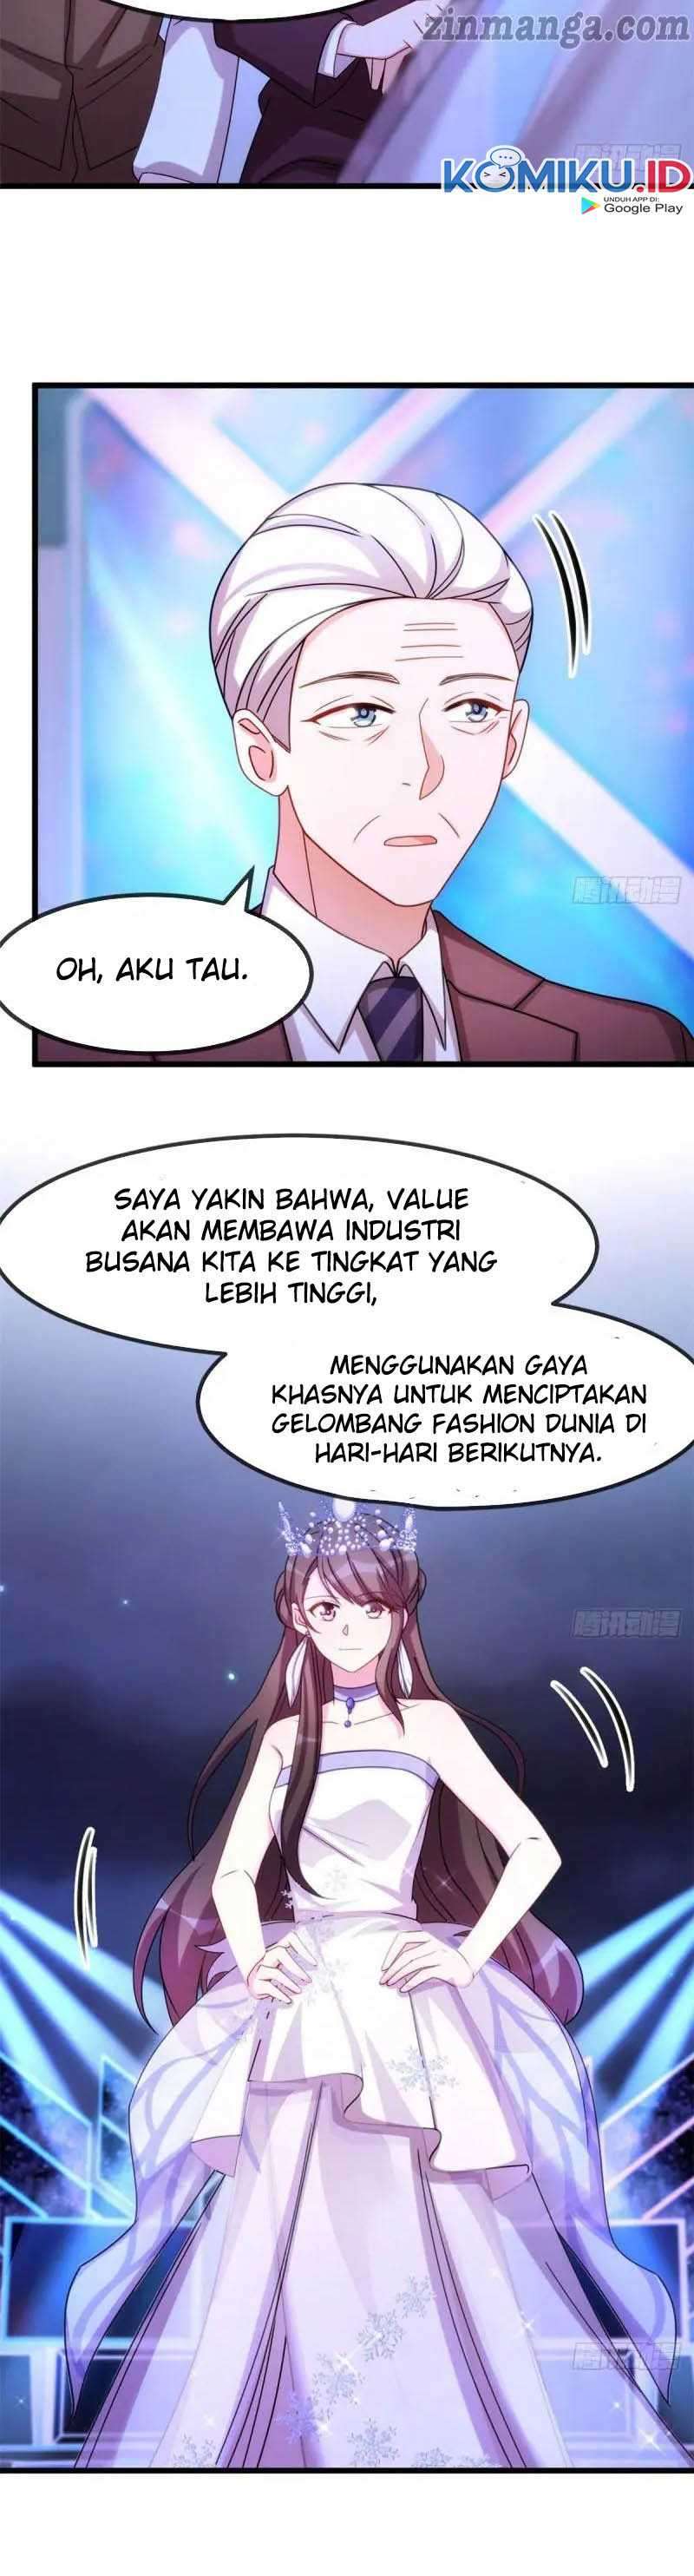 Ceo’s Sudden Proposal Chapter 272